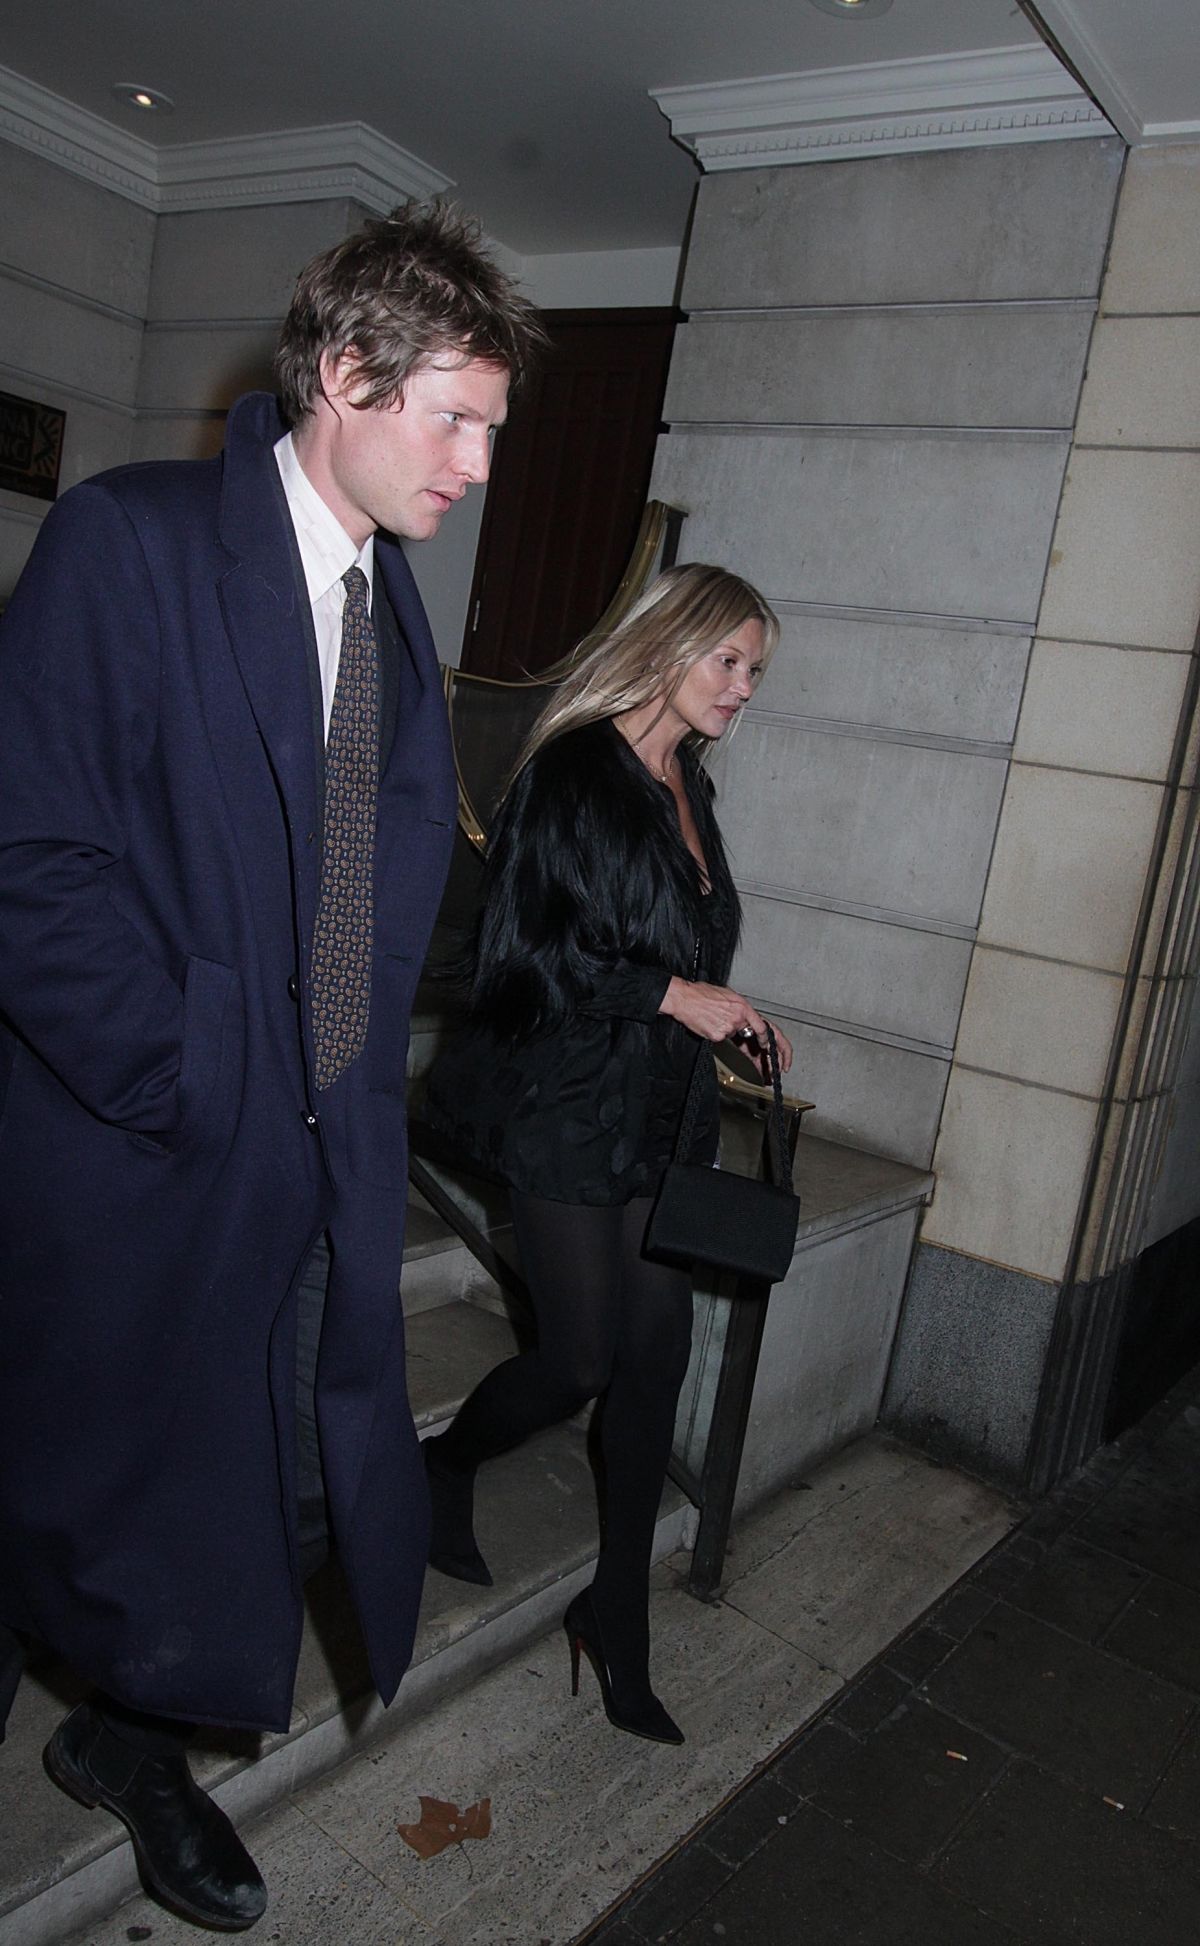 kate-moss-and-count-nikolai-von-bismarck-out-for-her-birthday-in-london-01-16-2019-4.jpg